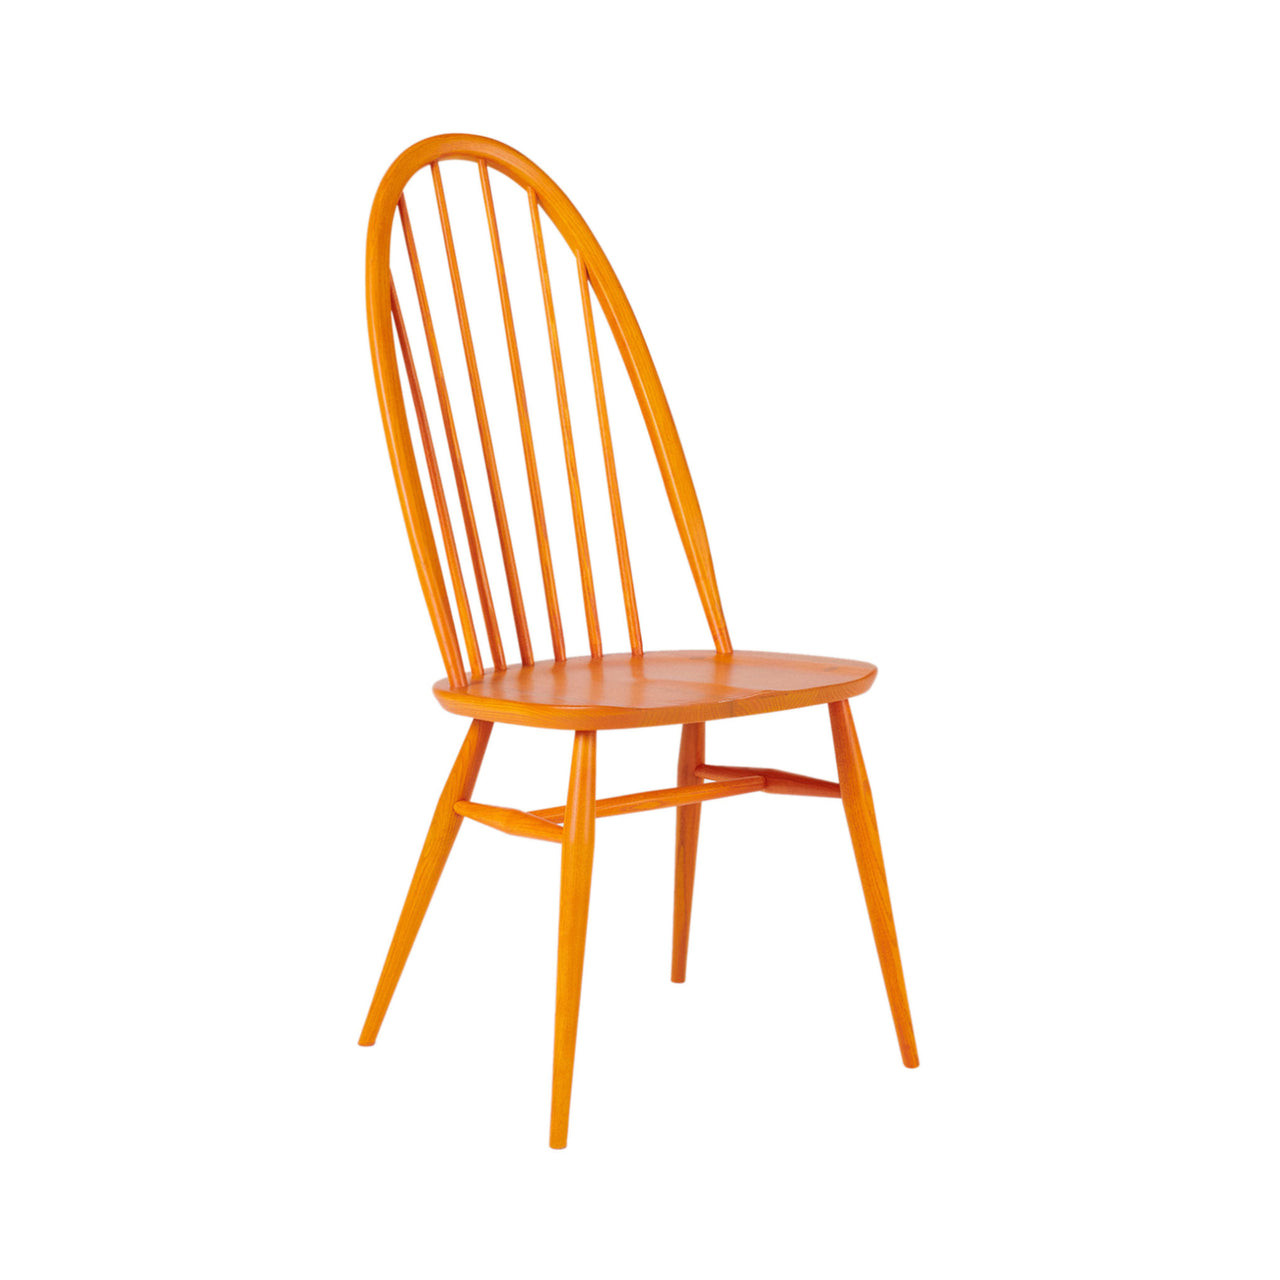 Originals Utility High Back Chair: Stained Ochre